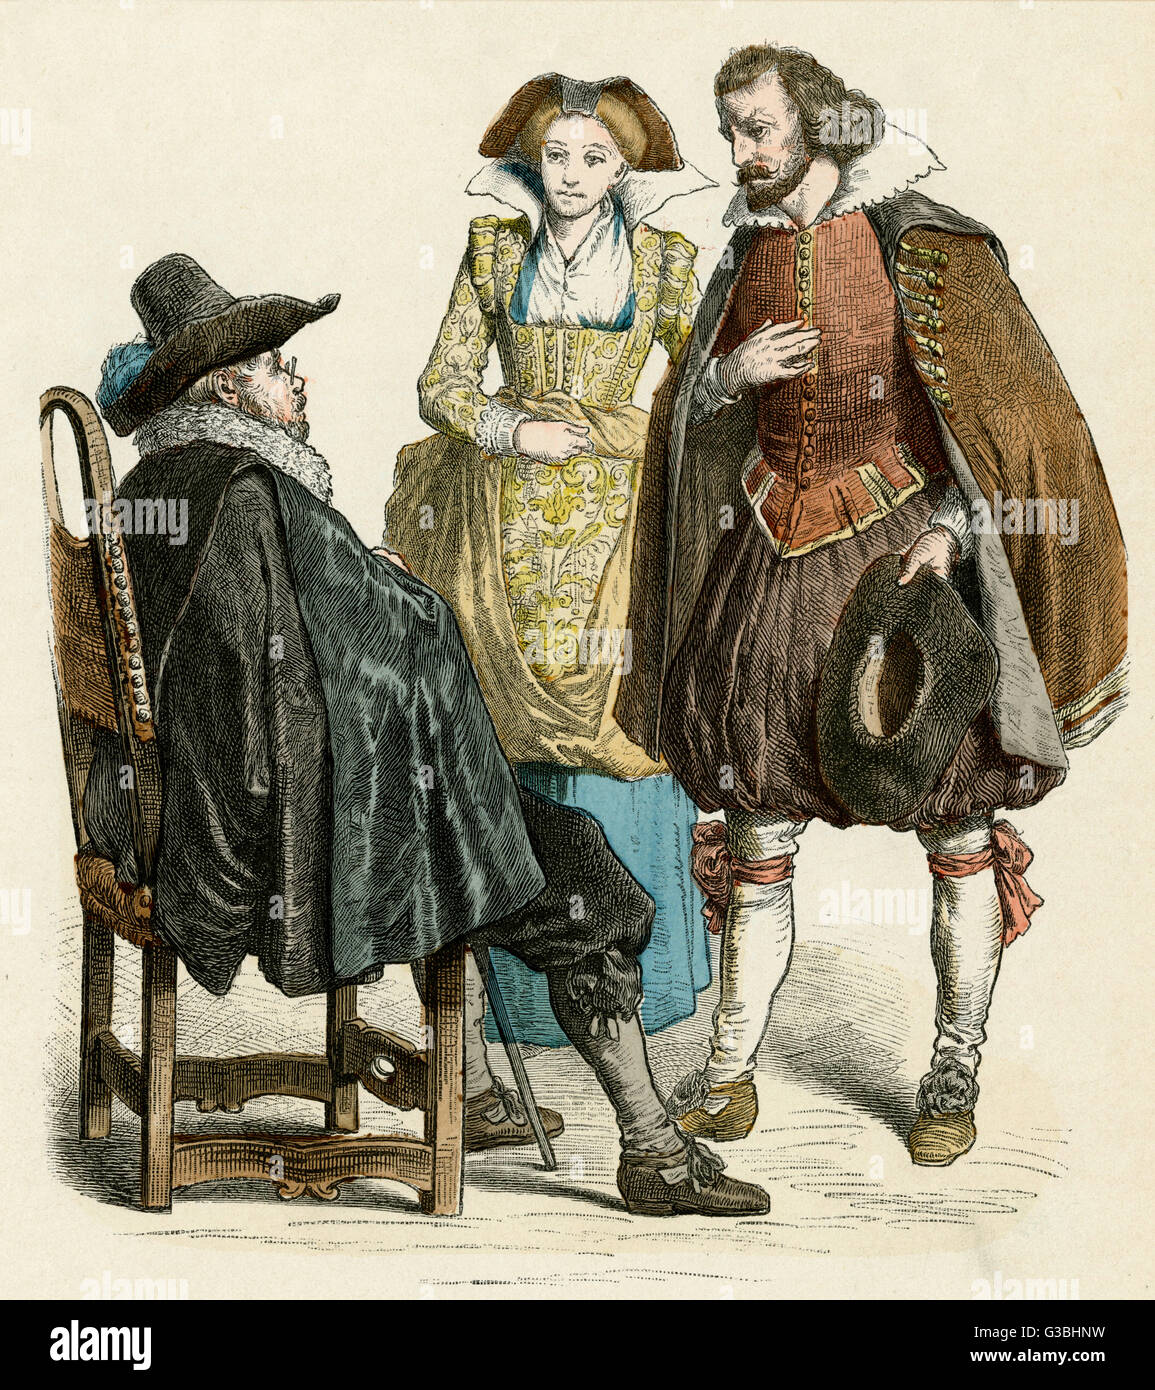 Costume allemand vers 1615 Banque D'Images